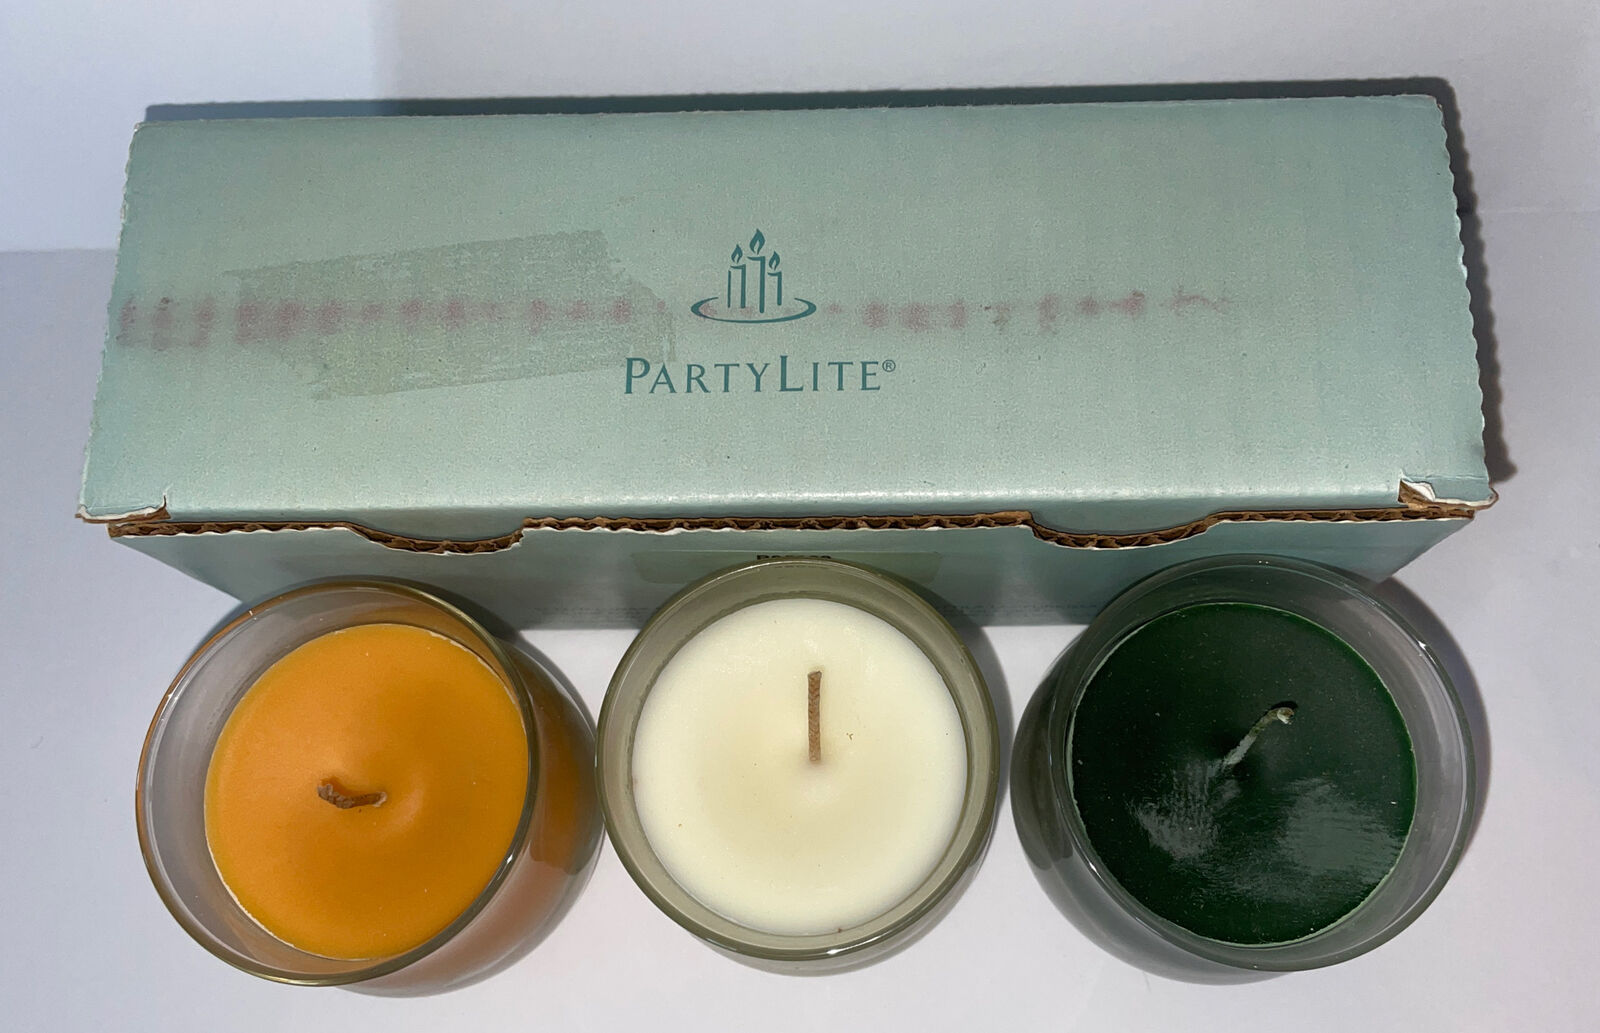 PartyLite 3 Mini Barrel Jar Candles NIB Frosted Pines Snowberries Embers P95009